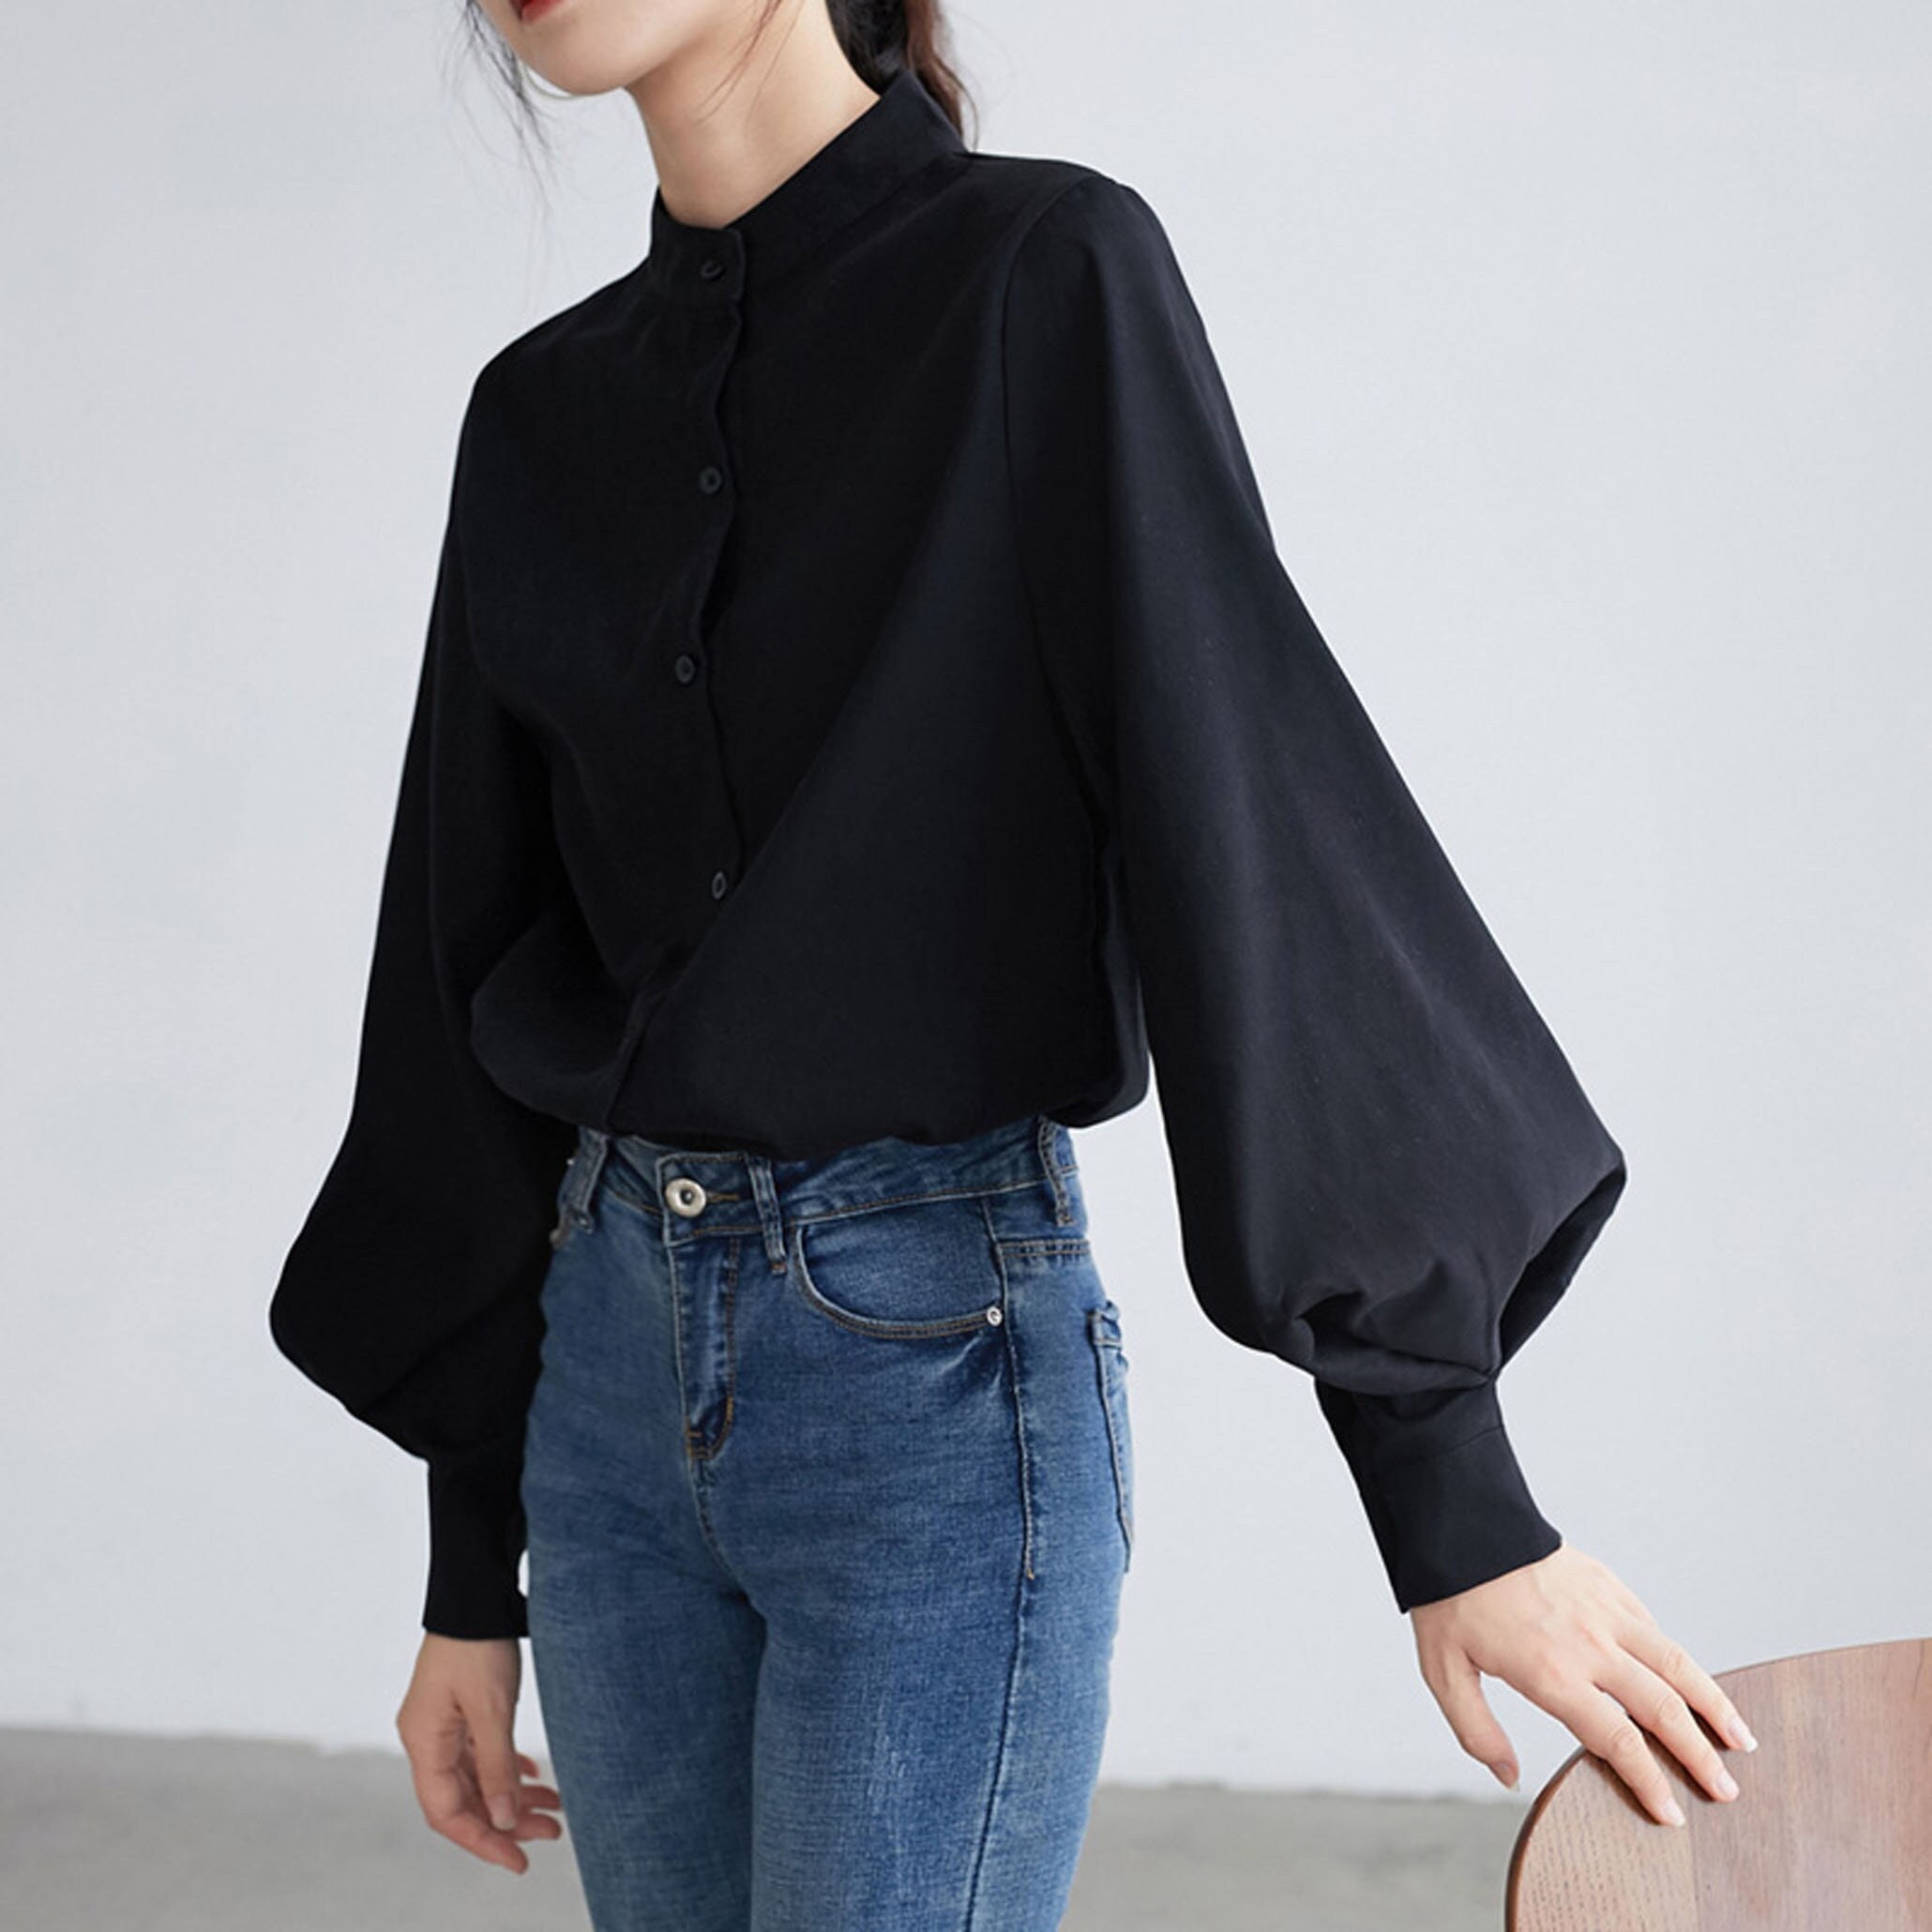 PUFF Sleeves High Neck Long Sleeves Shirt Top Women Office - Etsy